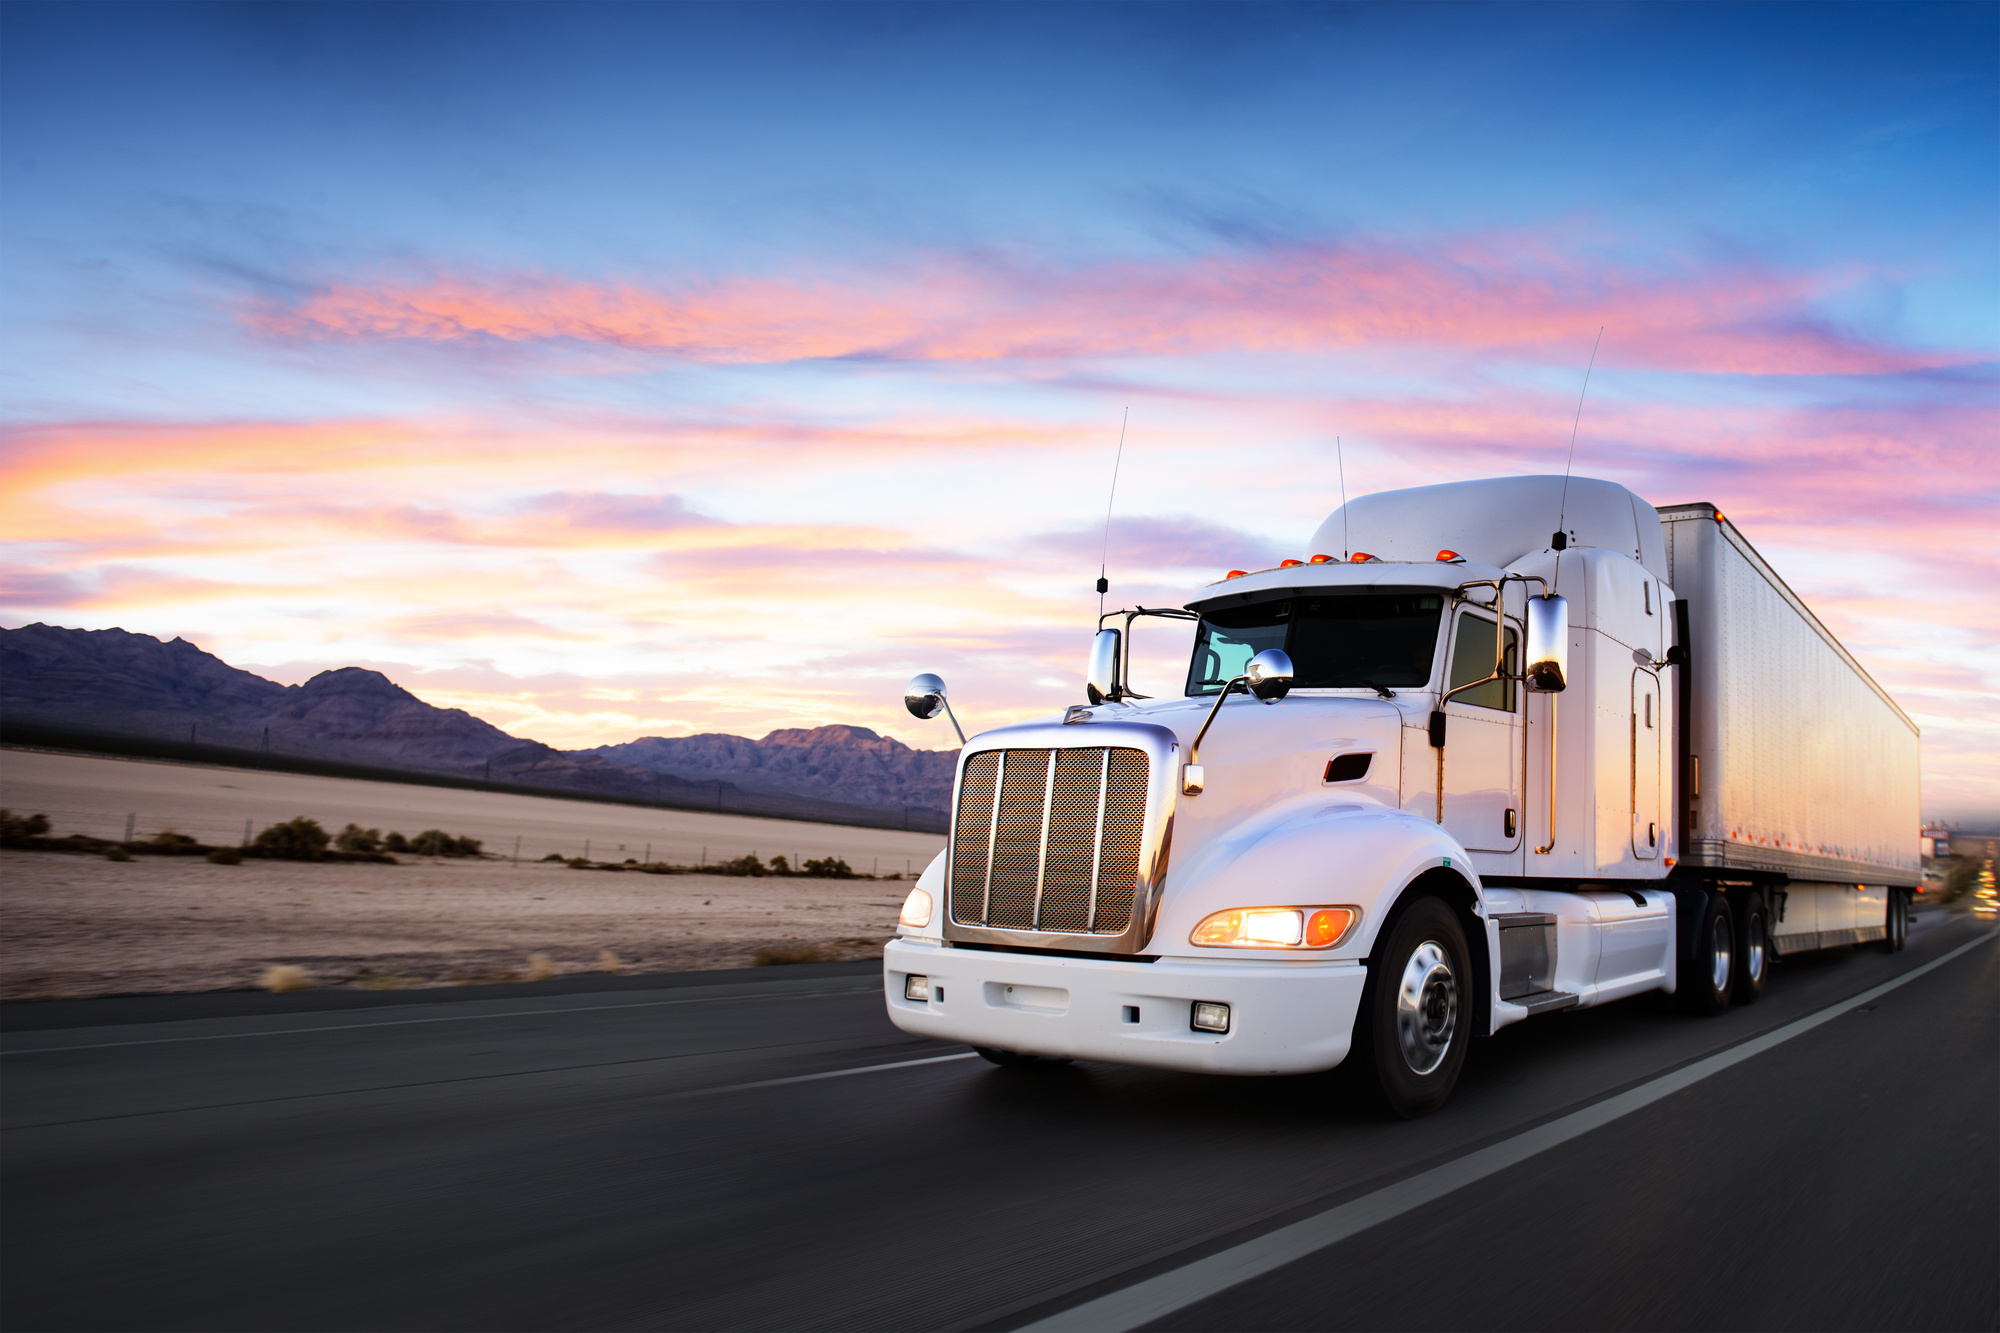 https://techdrive.co/wp-content/uploads/2022/01/6-essential-truck-driver-safety-tips.jpg